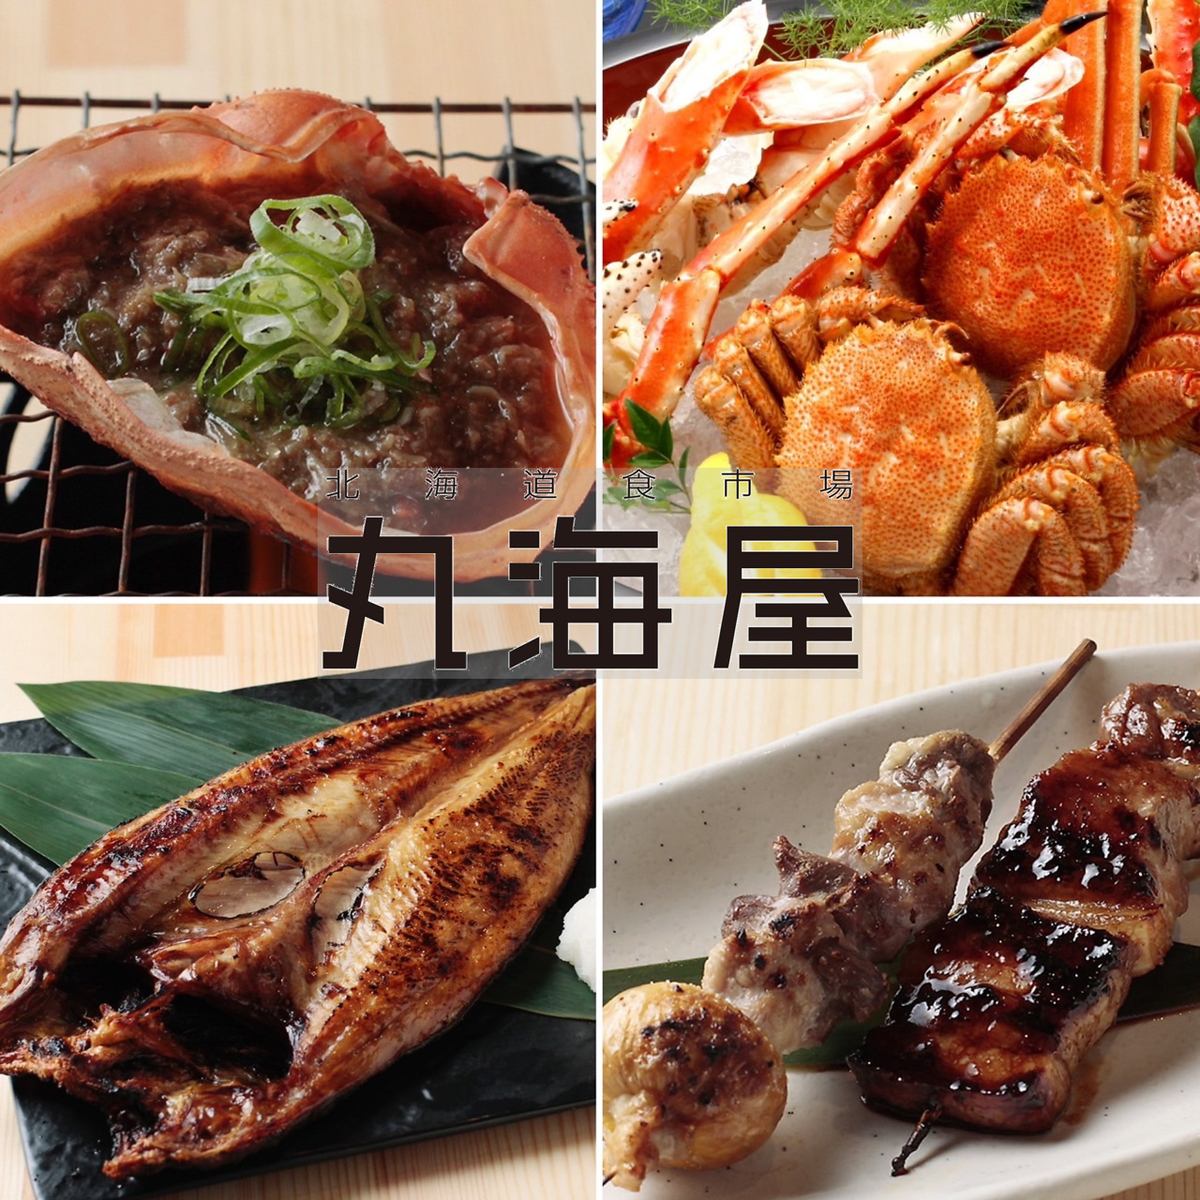 For a limited time only! Get an additional 500 yen discount on the lunch banquet course!